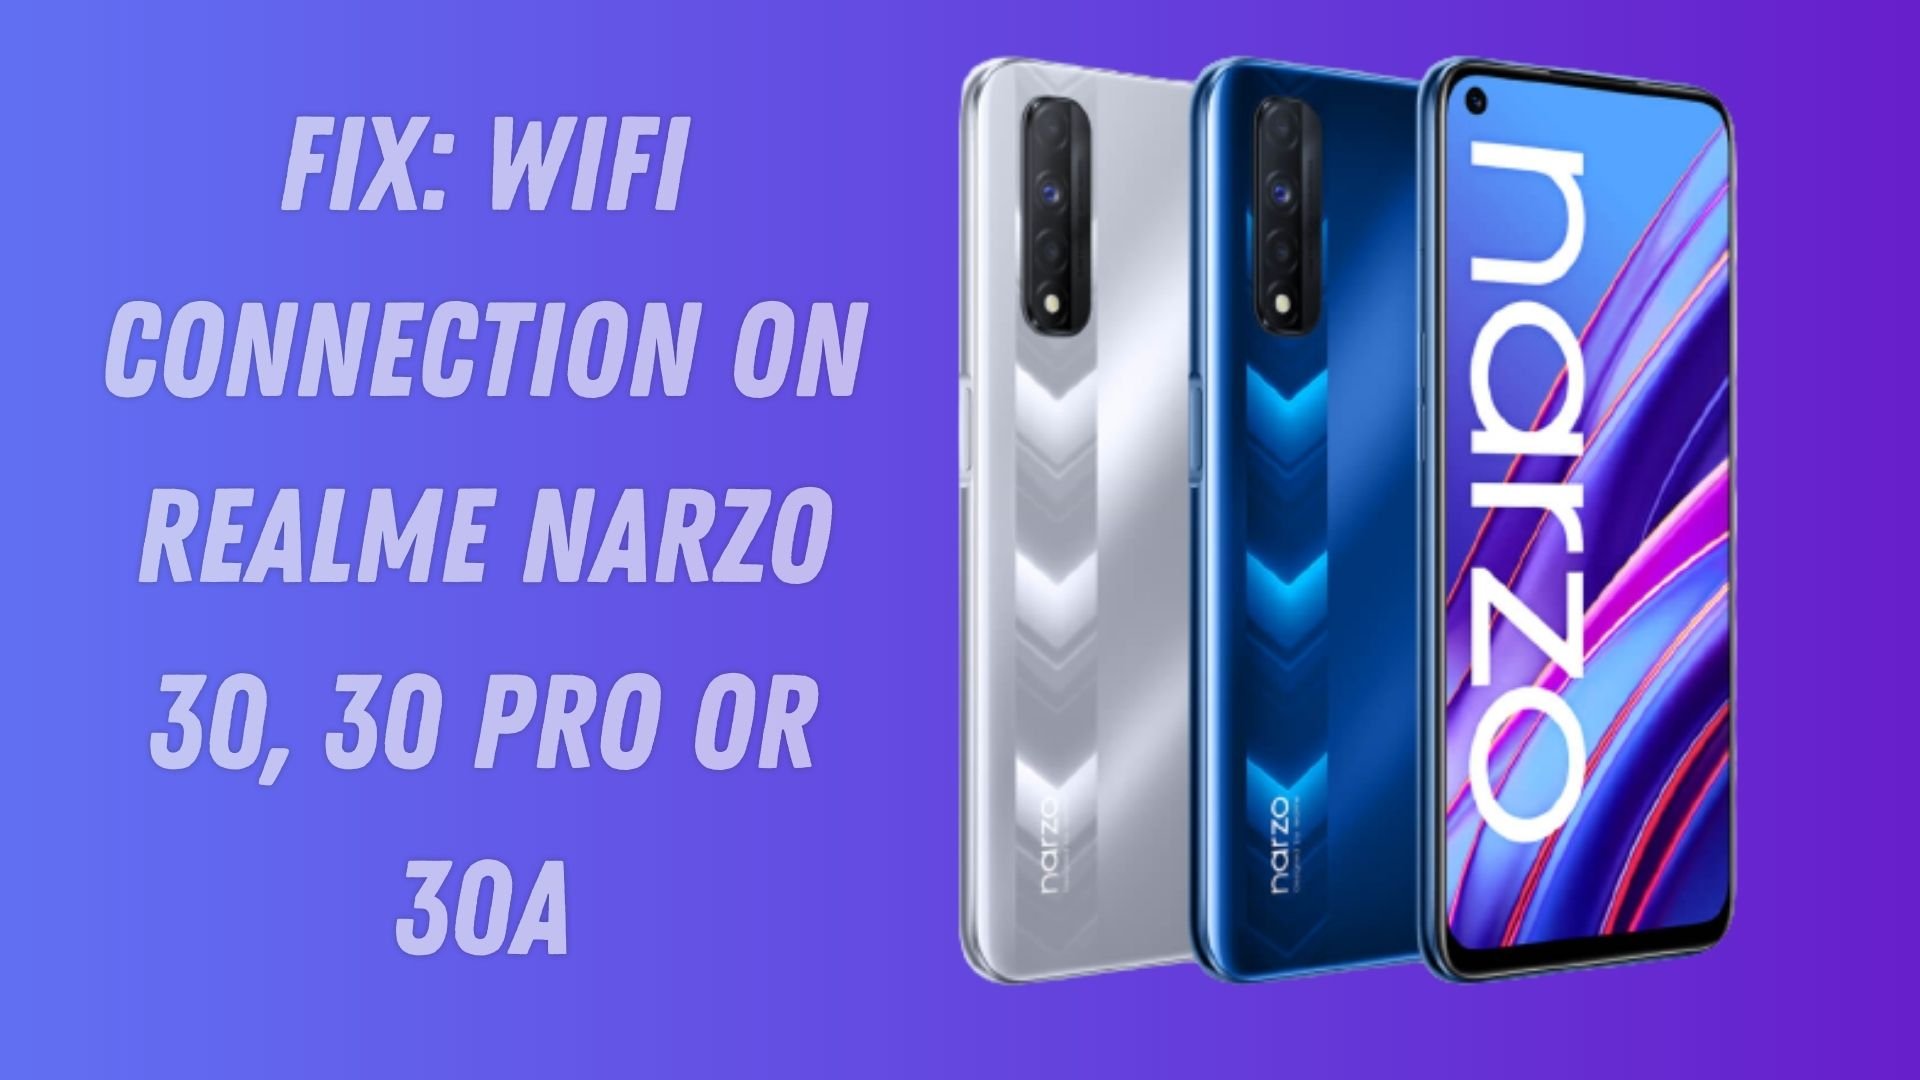 Fix: WiFi Connection on Realme Narzo 30, 30 Pro or 30A